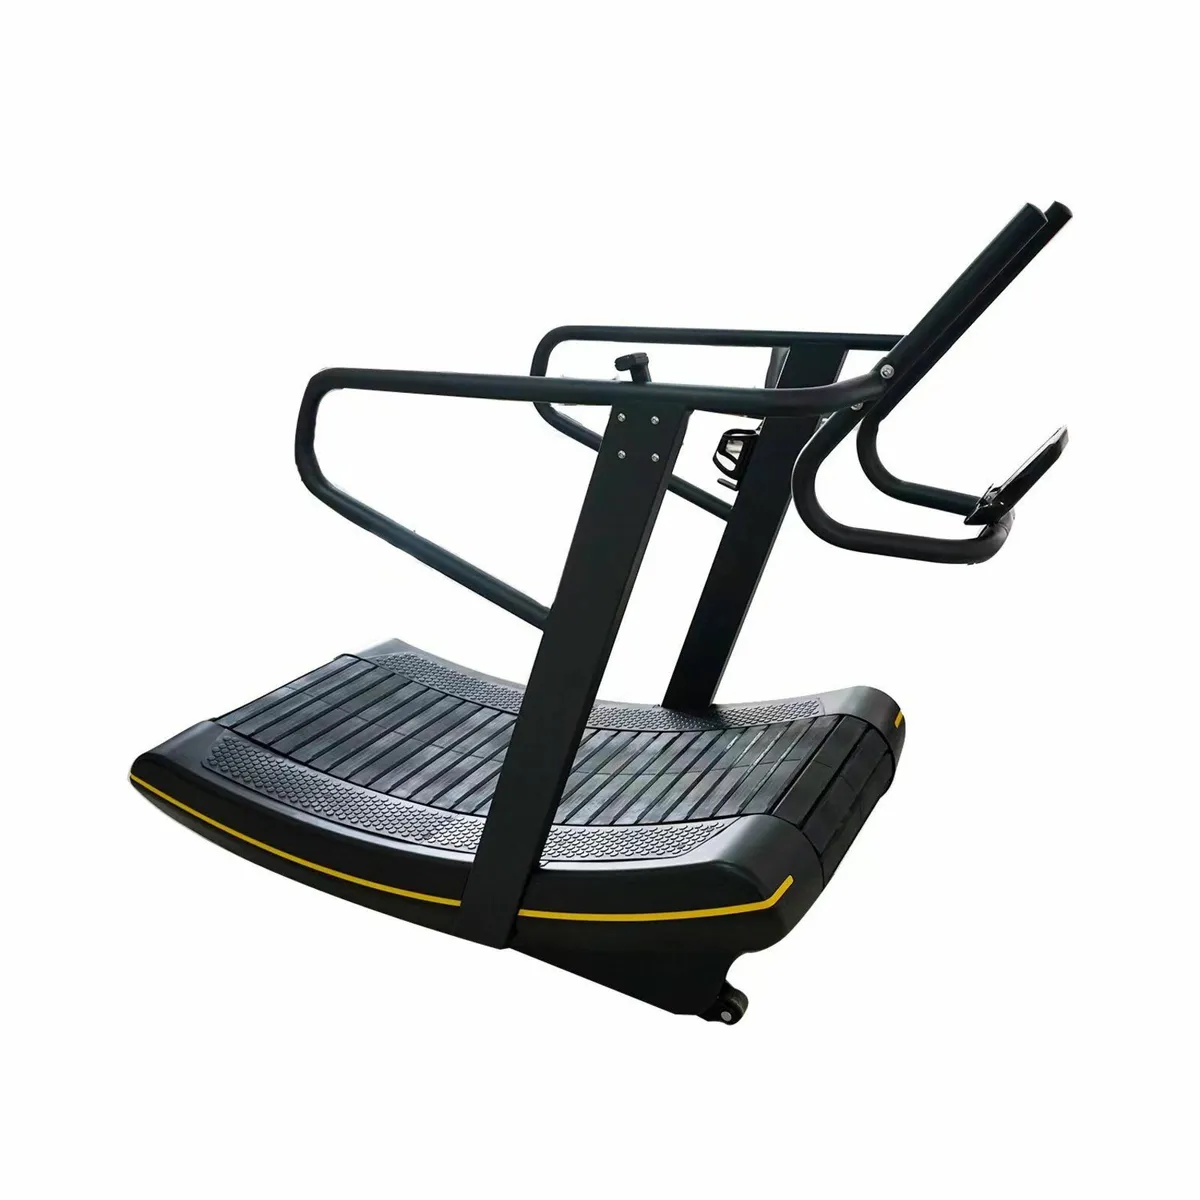 Non motorized Curved Treadmill - Image 1